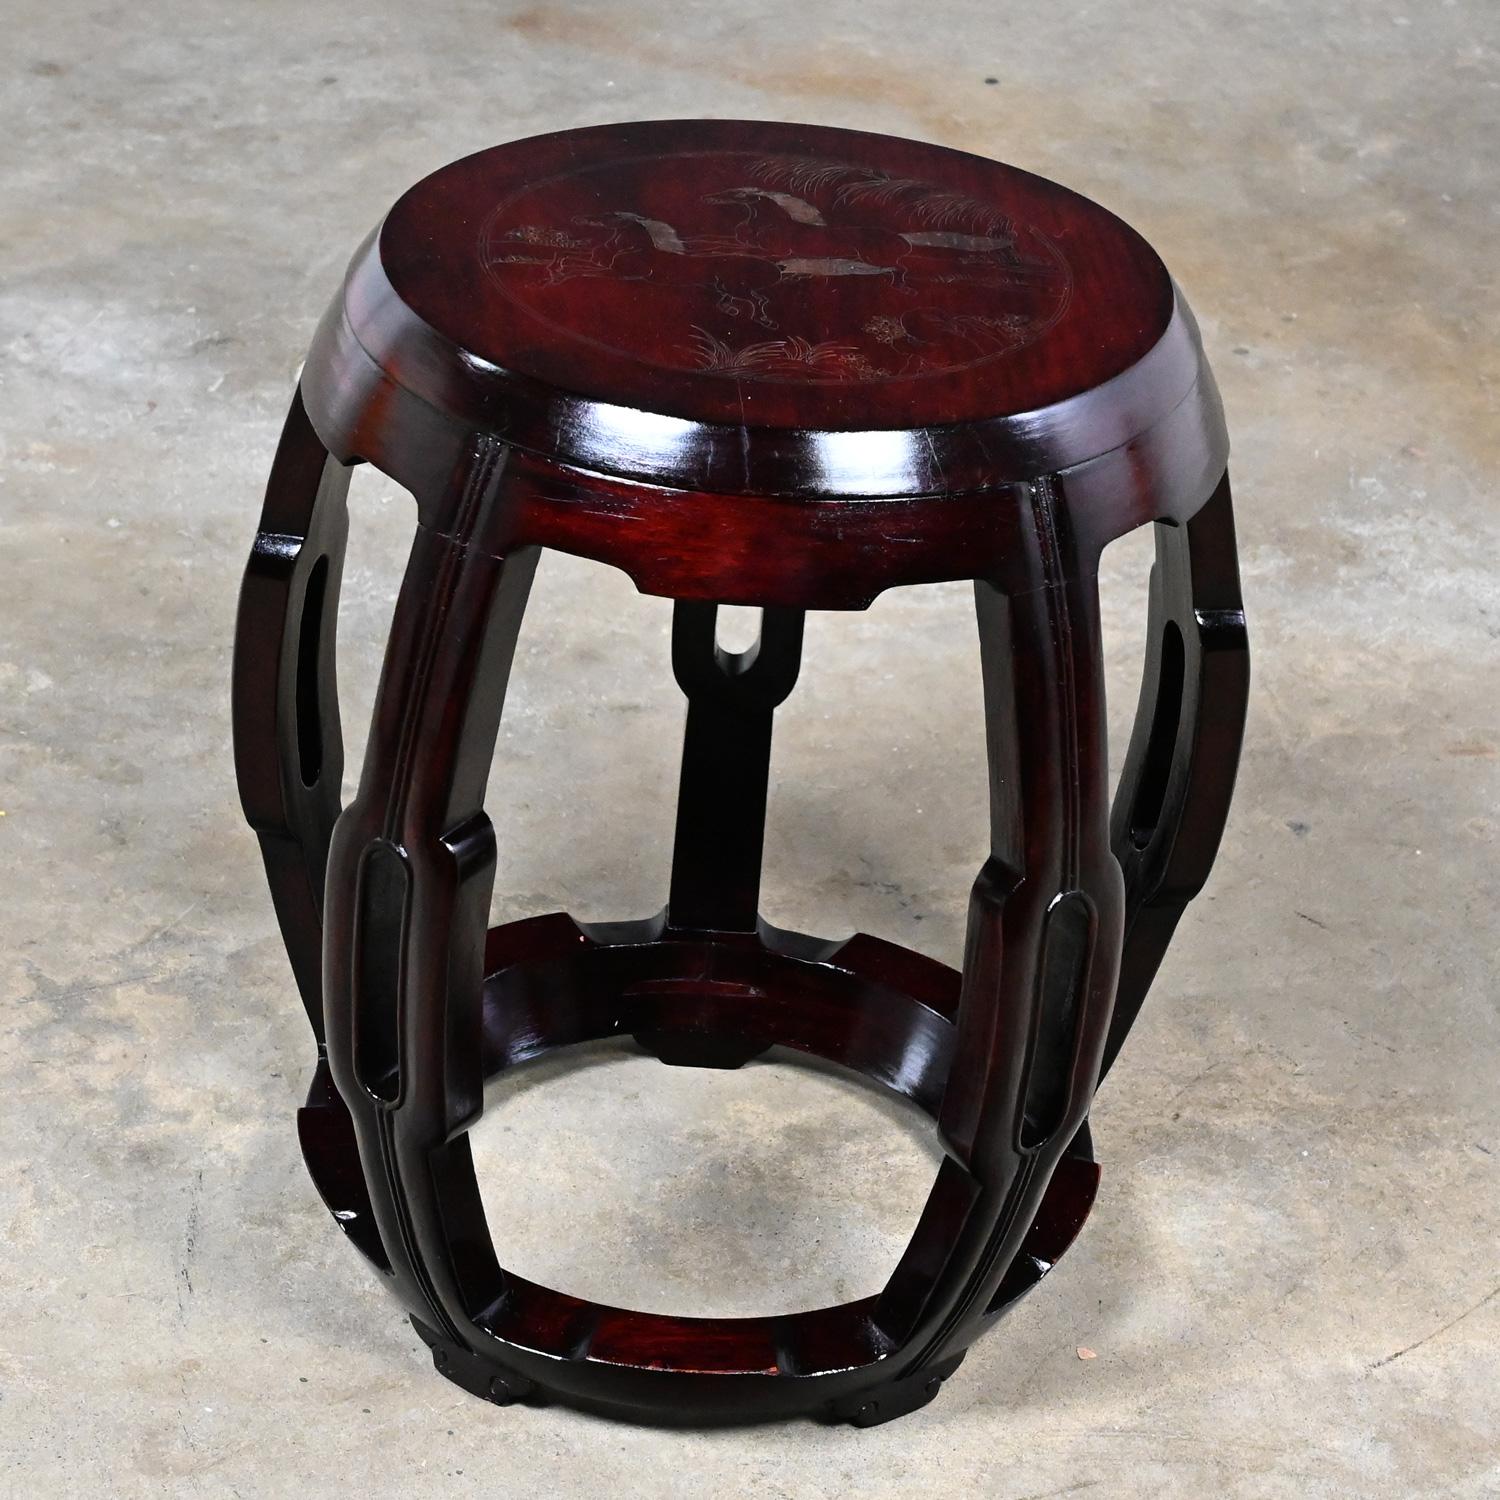 Mid 20th Century Chinoiserie Asian Rosewood Barrel Drum Table or Garden Stool For Sale 9